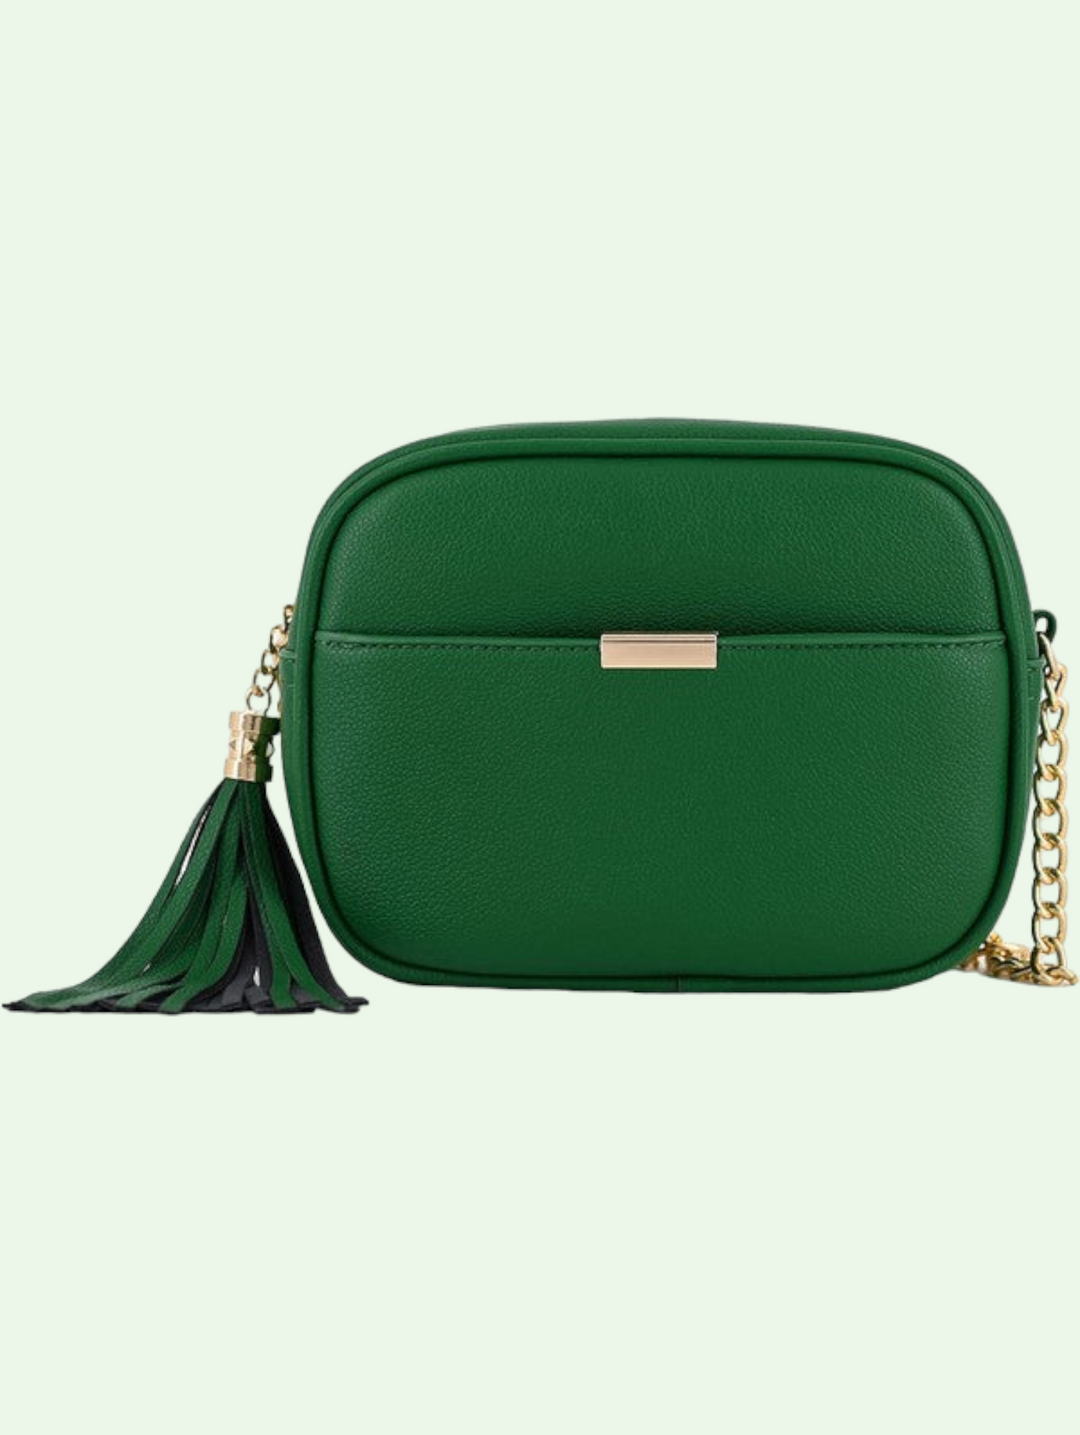 a front view of the tassel crossbody bag